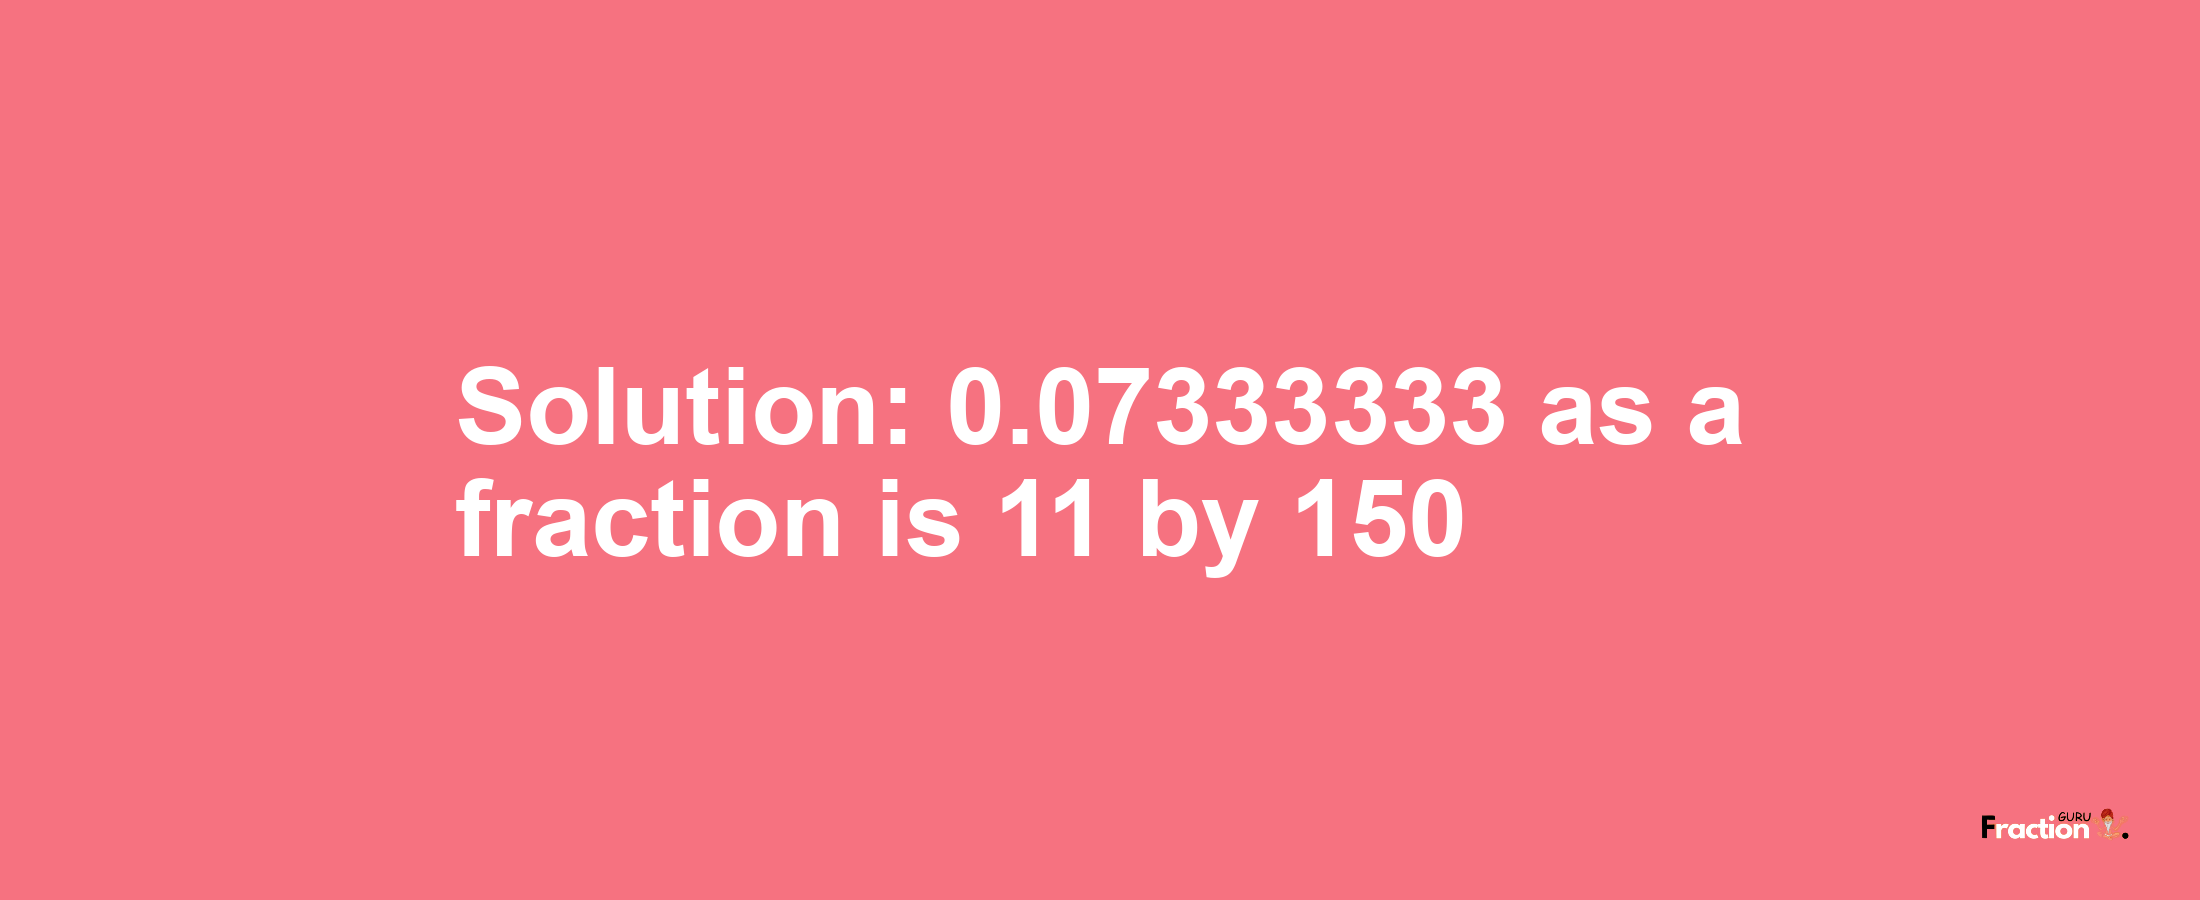 Solution:0.07333333 as a fraction is 11/150